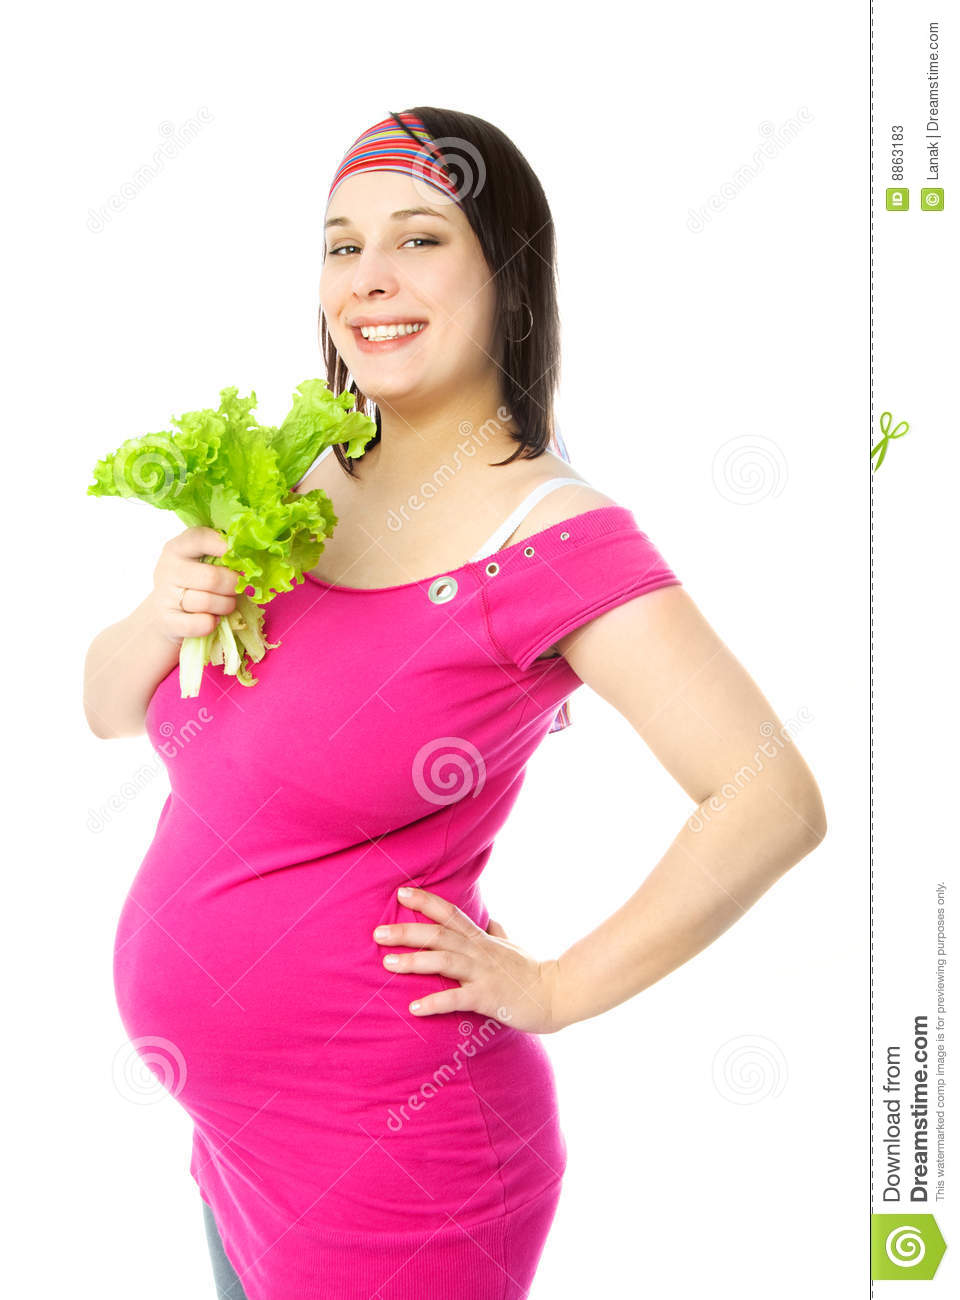 Portrait Of A Happy Young Pregnant Woman Eating Green Salad